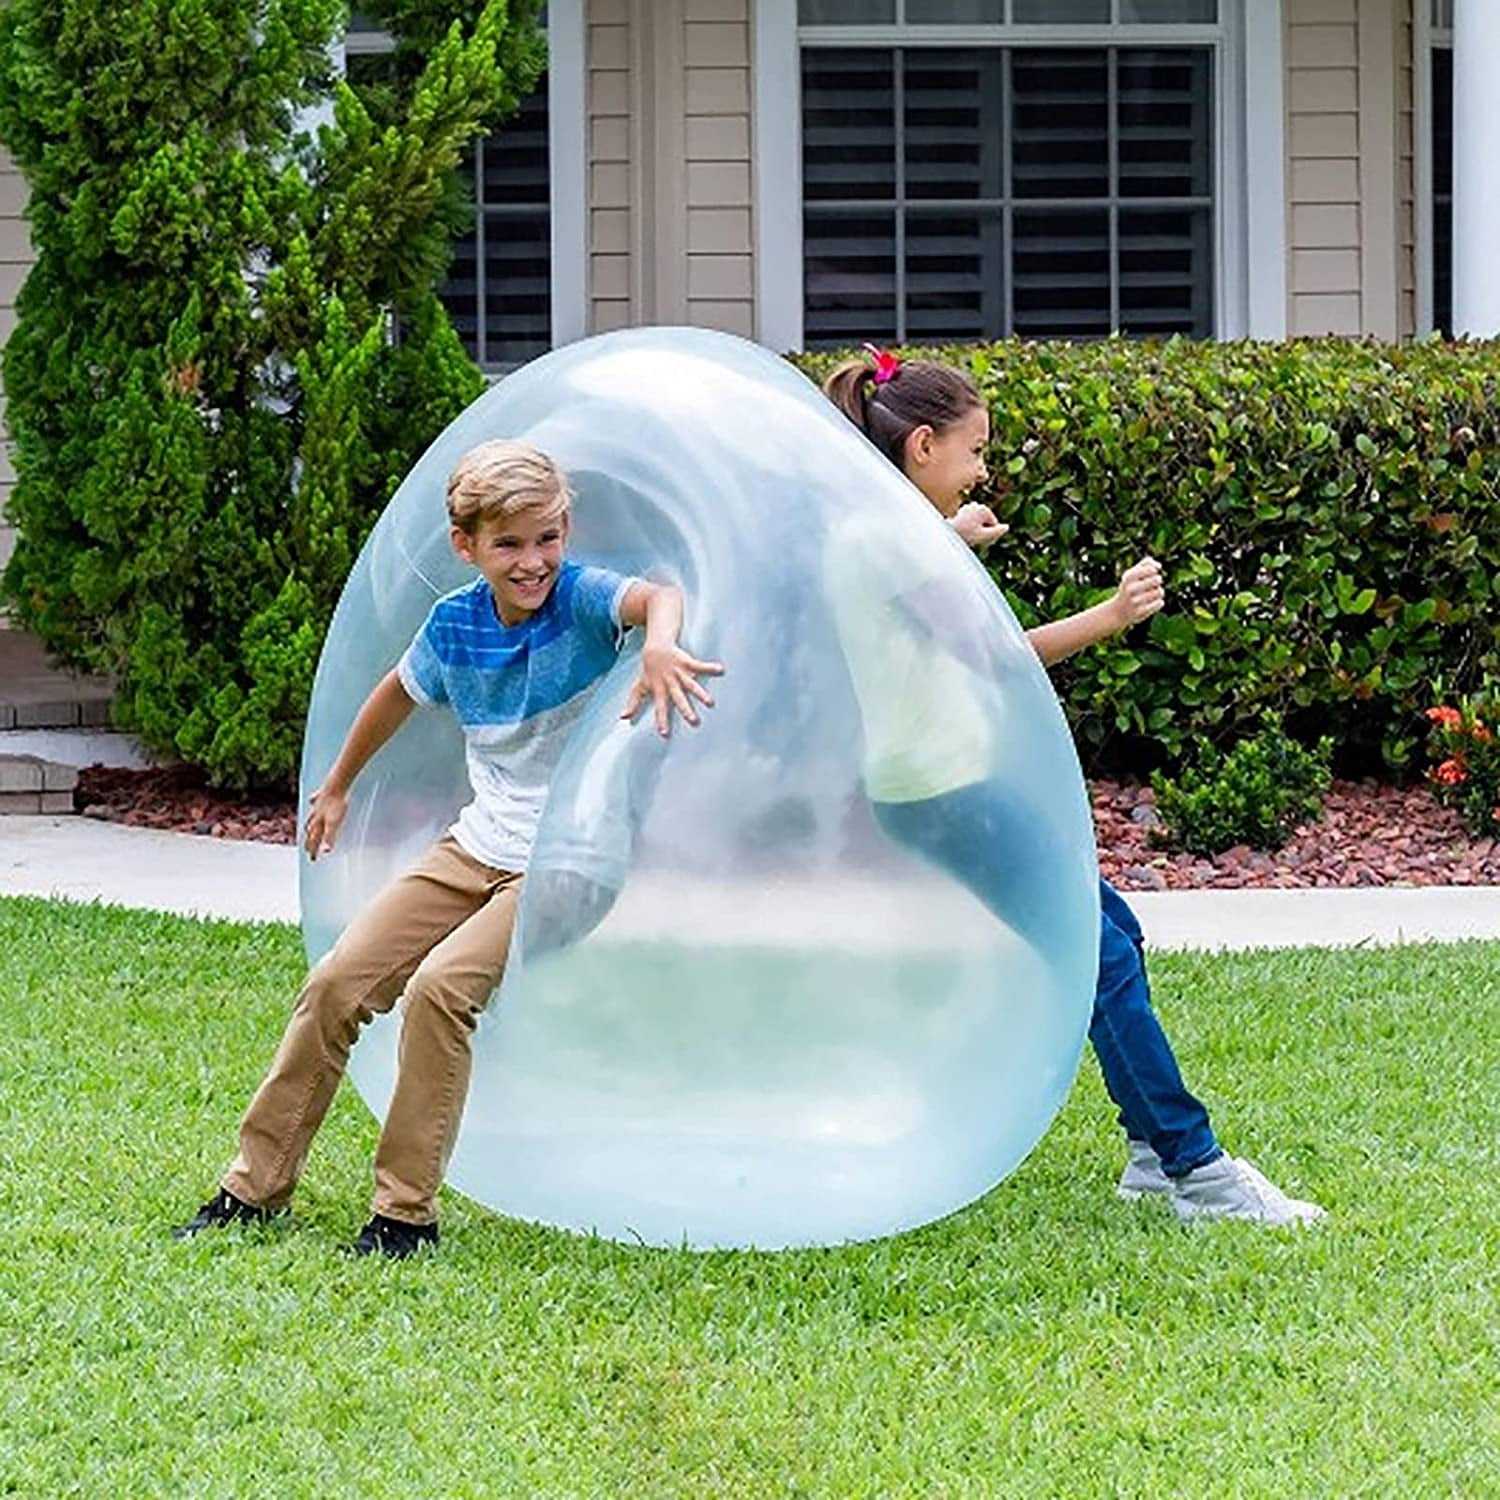 Durable Bubble Ball Inflatable Fun Amazing Bubble Ball Outdoor US US 